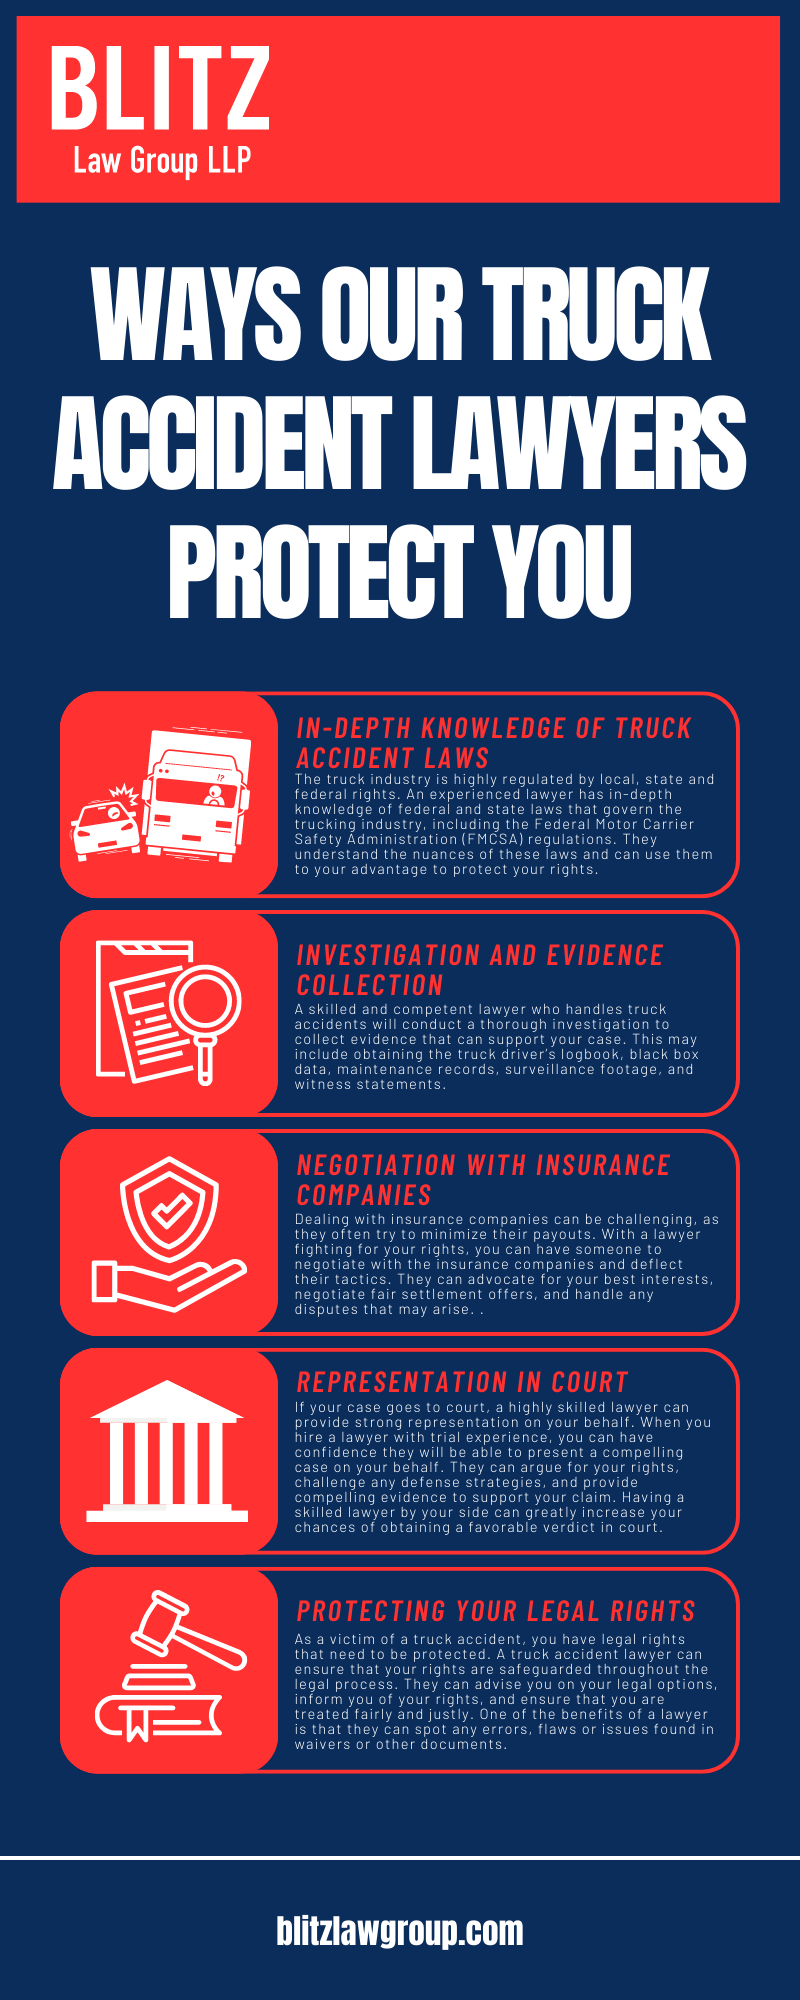 Ways Our Truck Accident Lawyers Protect You Infographic